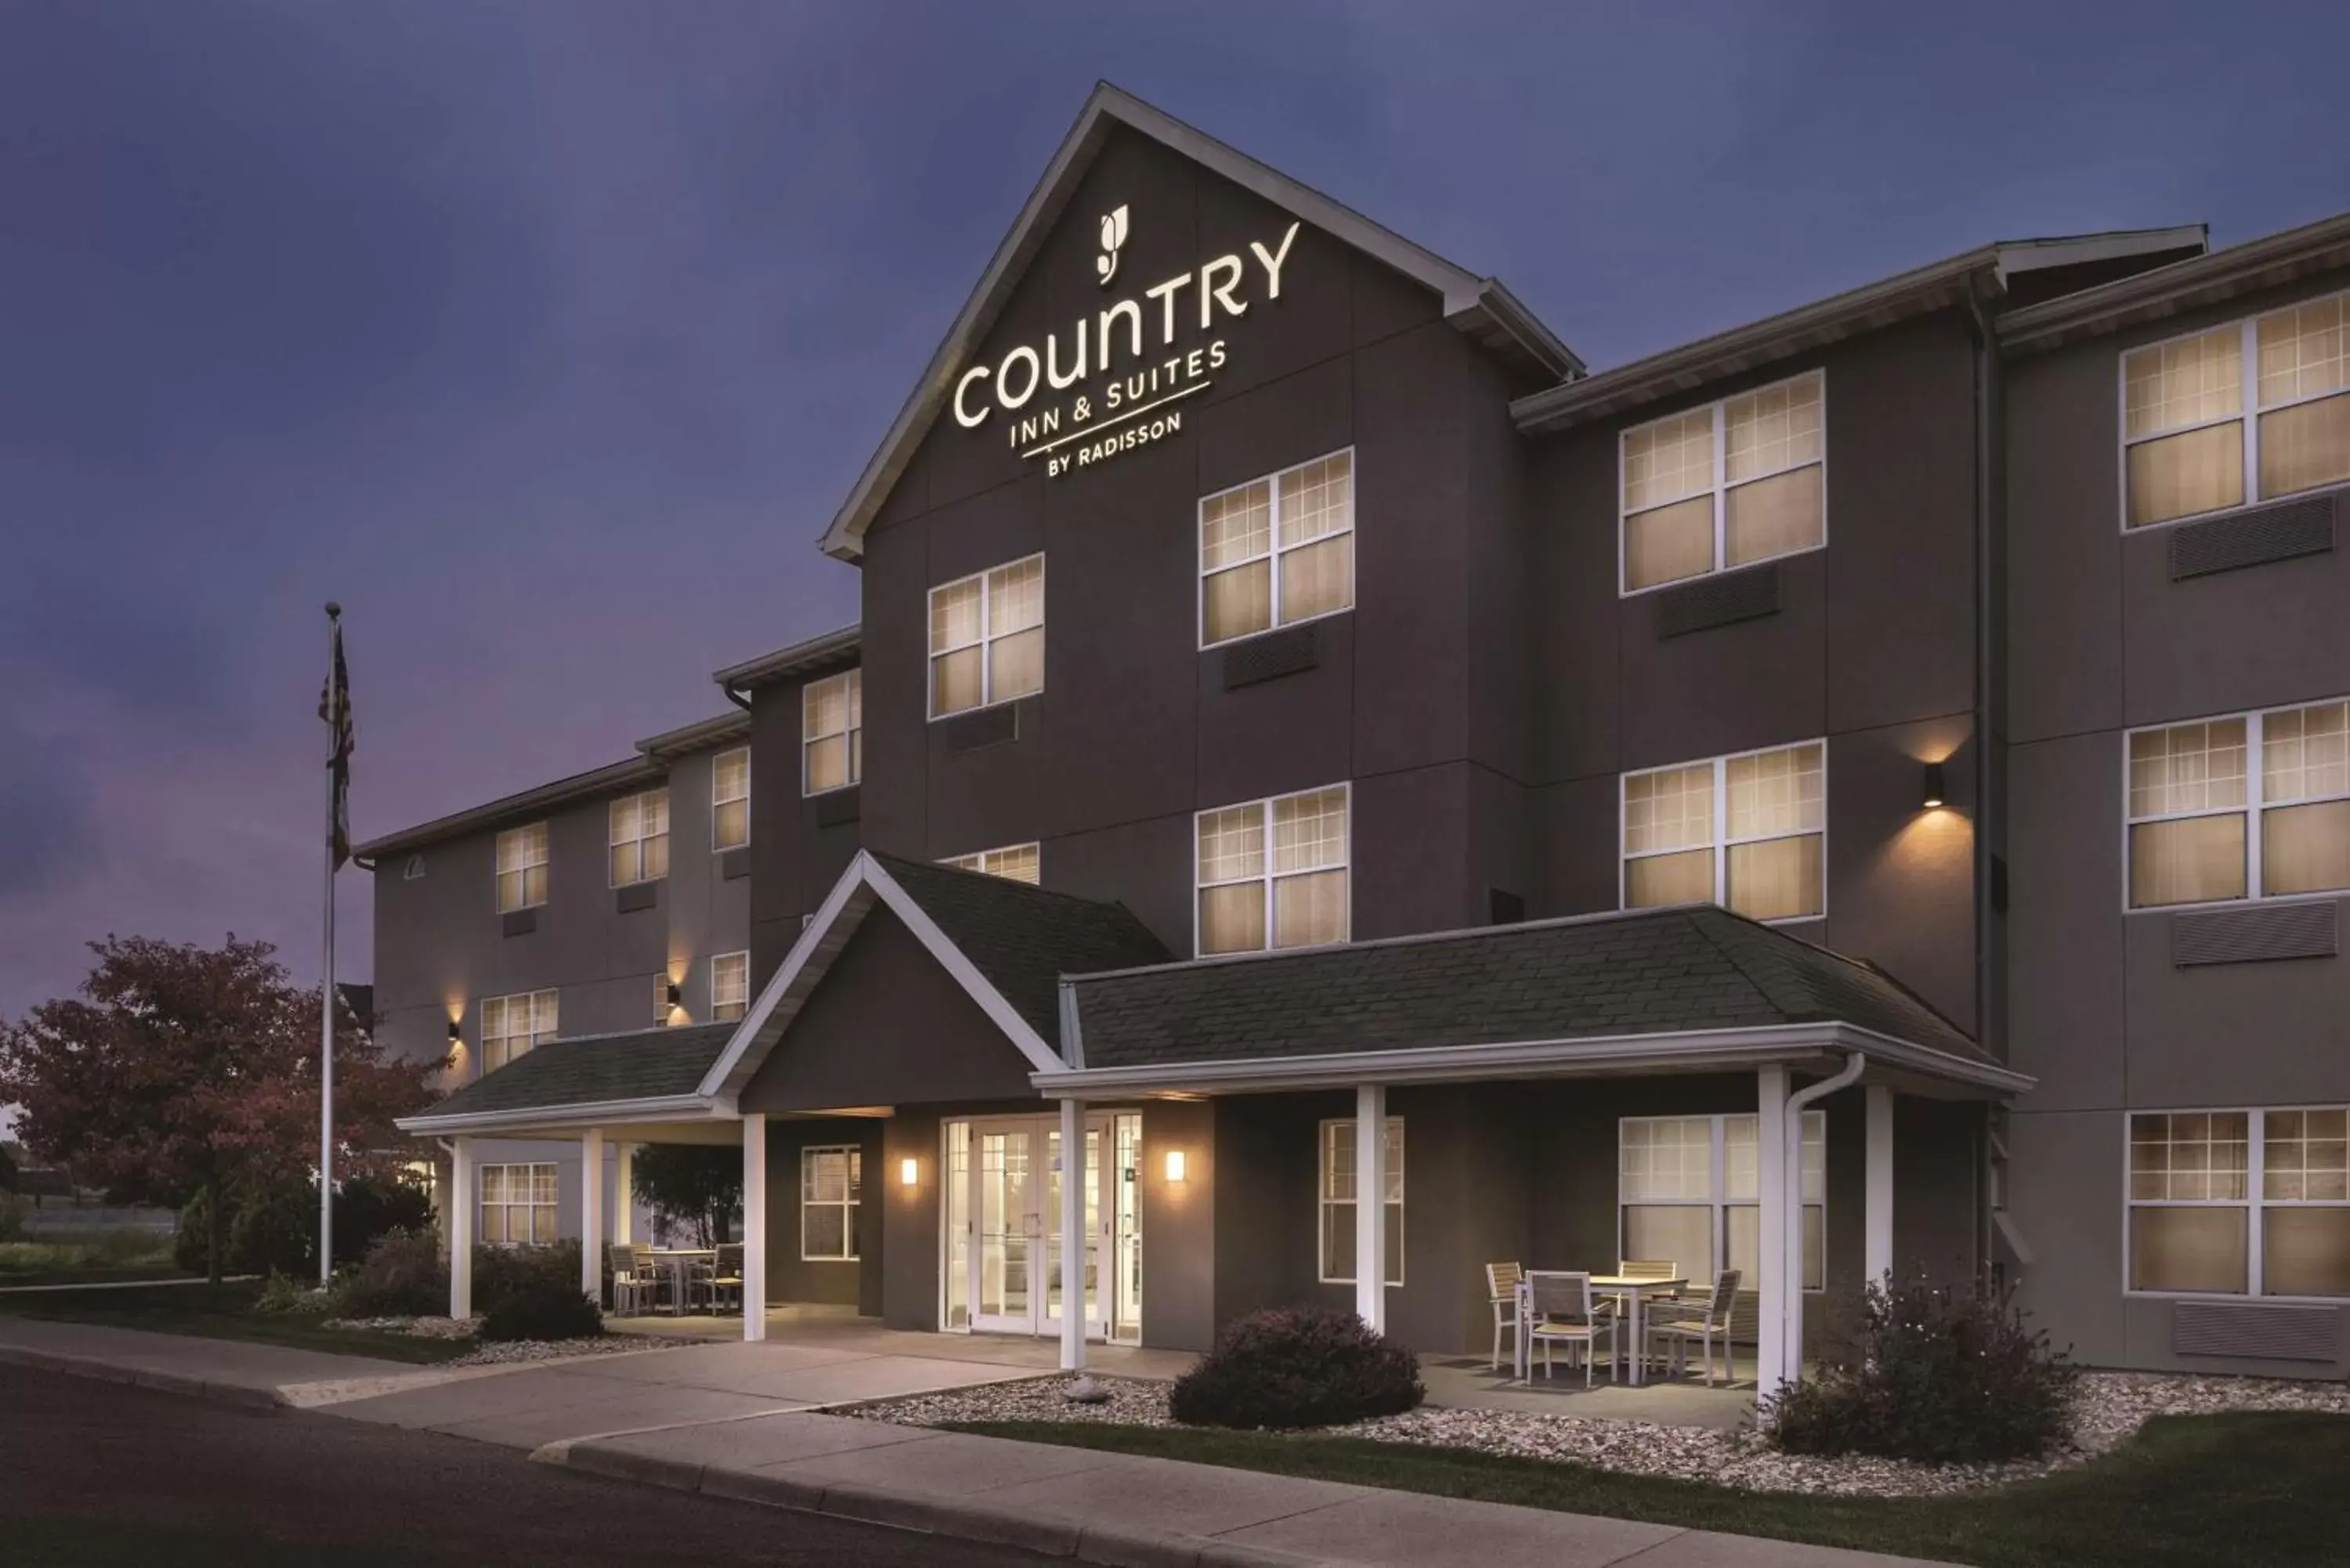 Property building in Country Inn & Suites by Radisson, Waterloo, IA